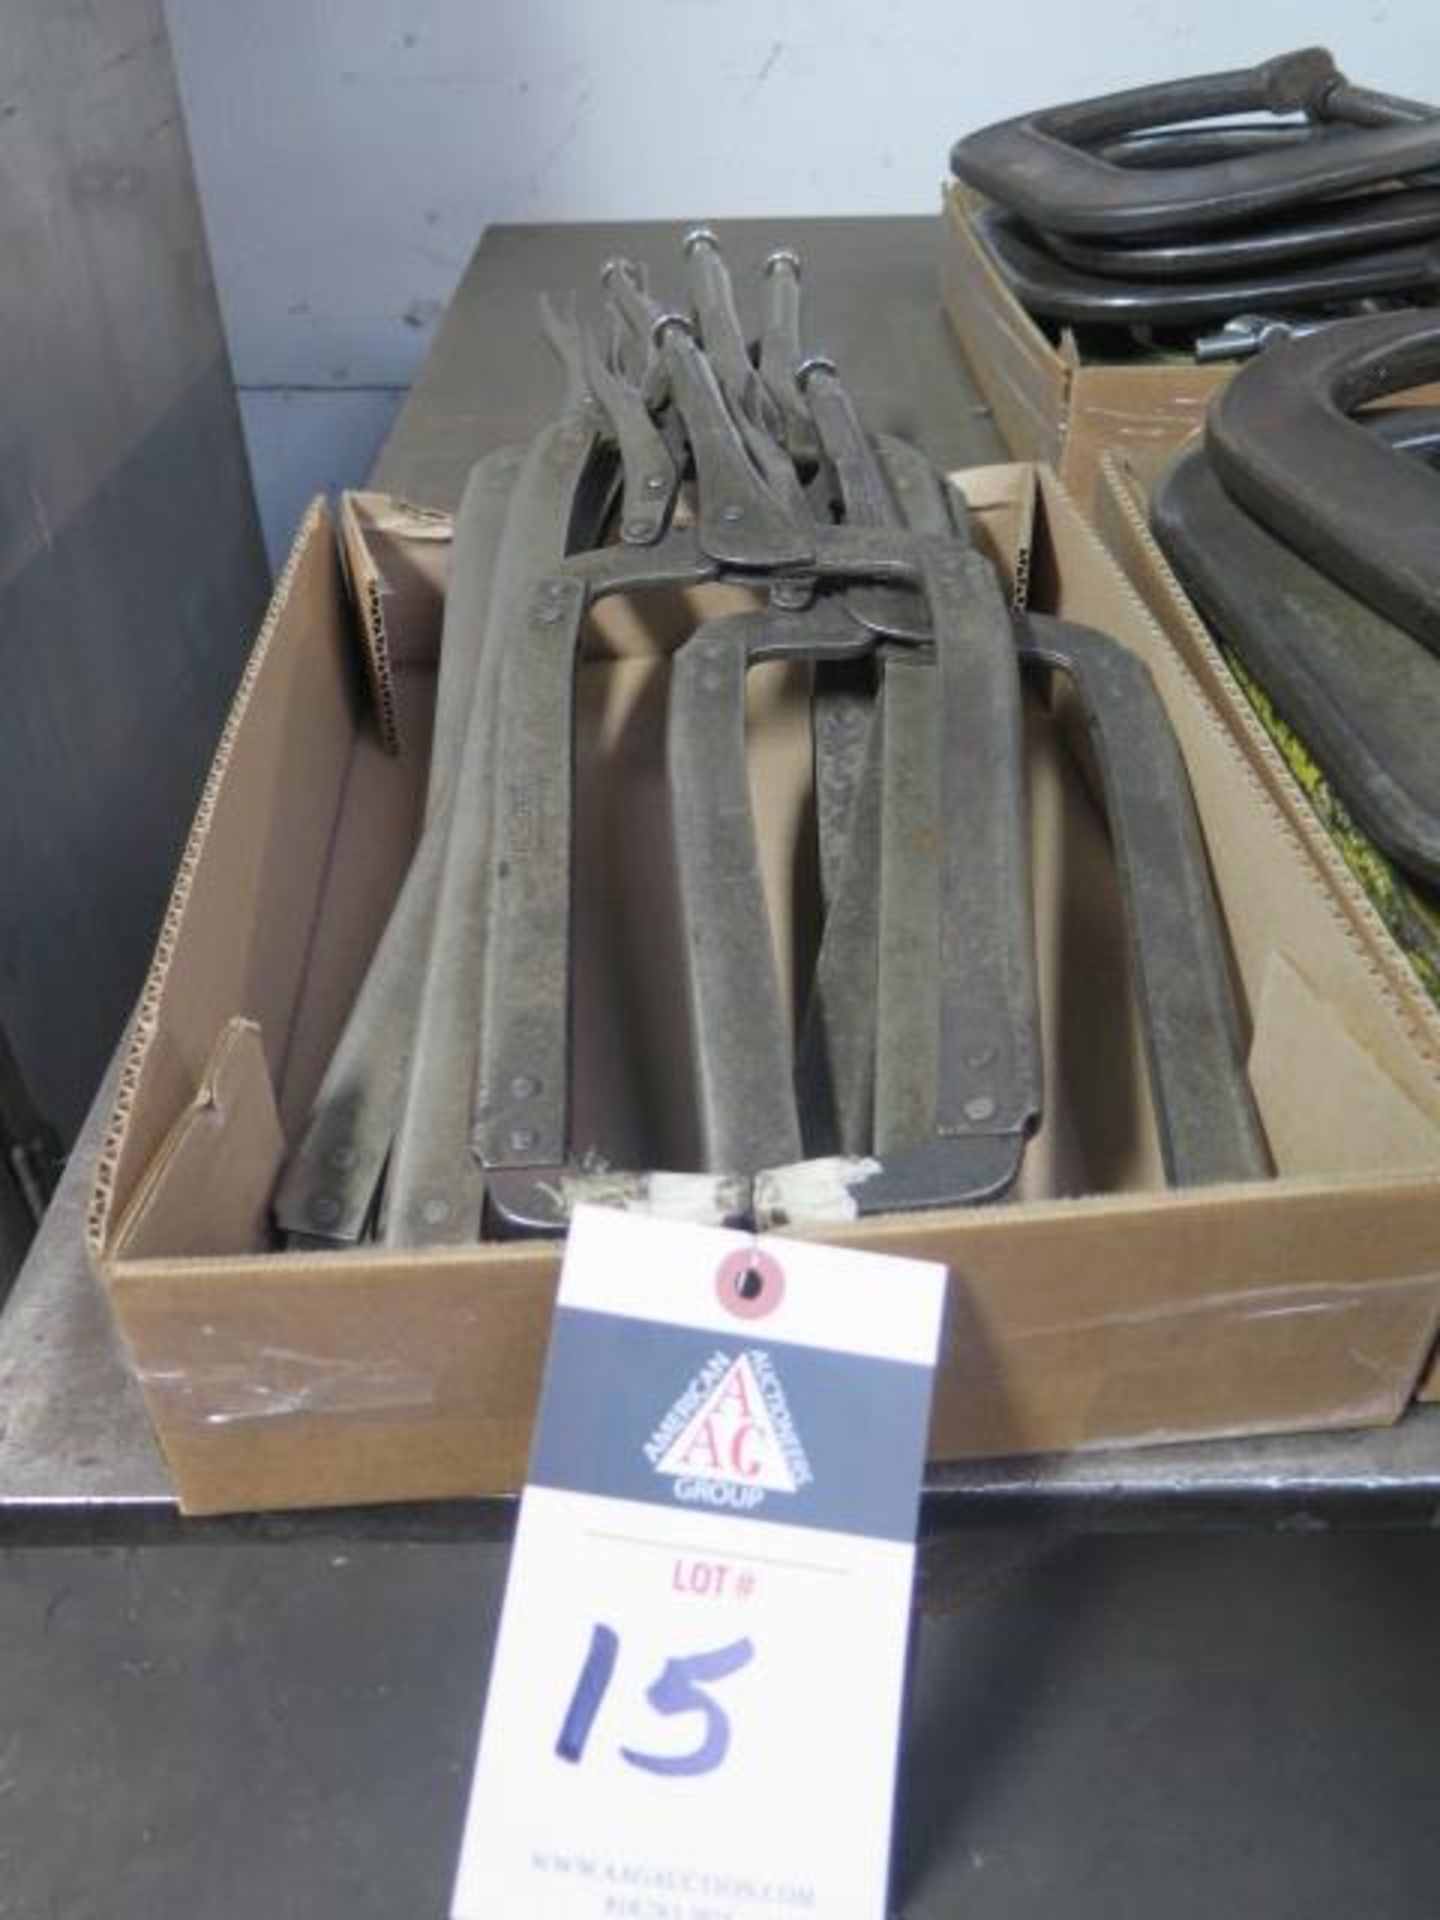 Welding Clamps (SOLD AS-IS - NO WARRANTY)